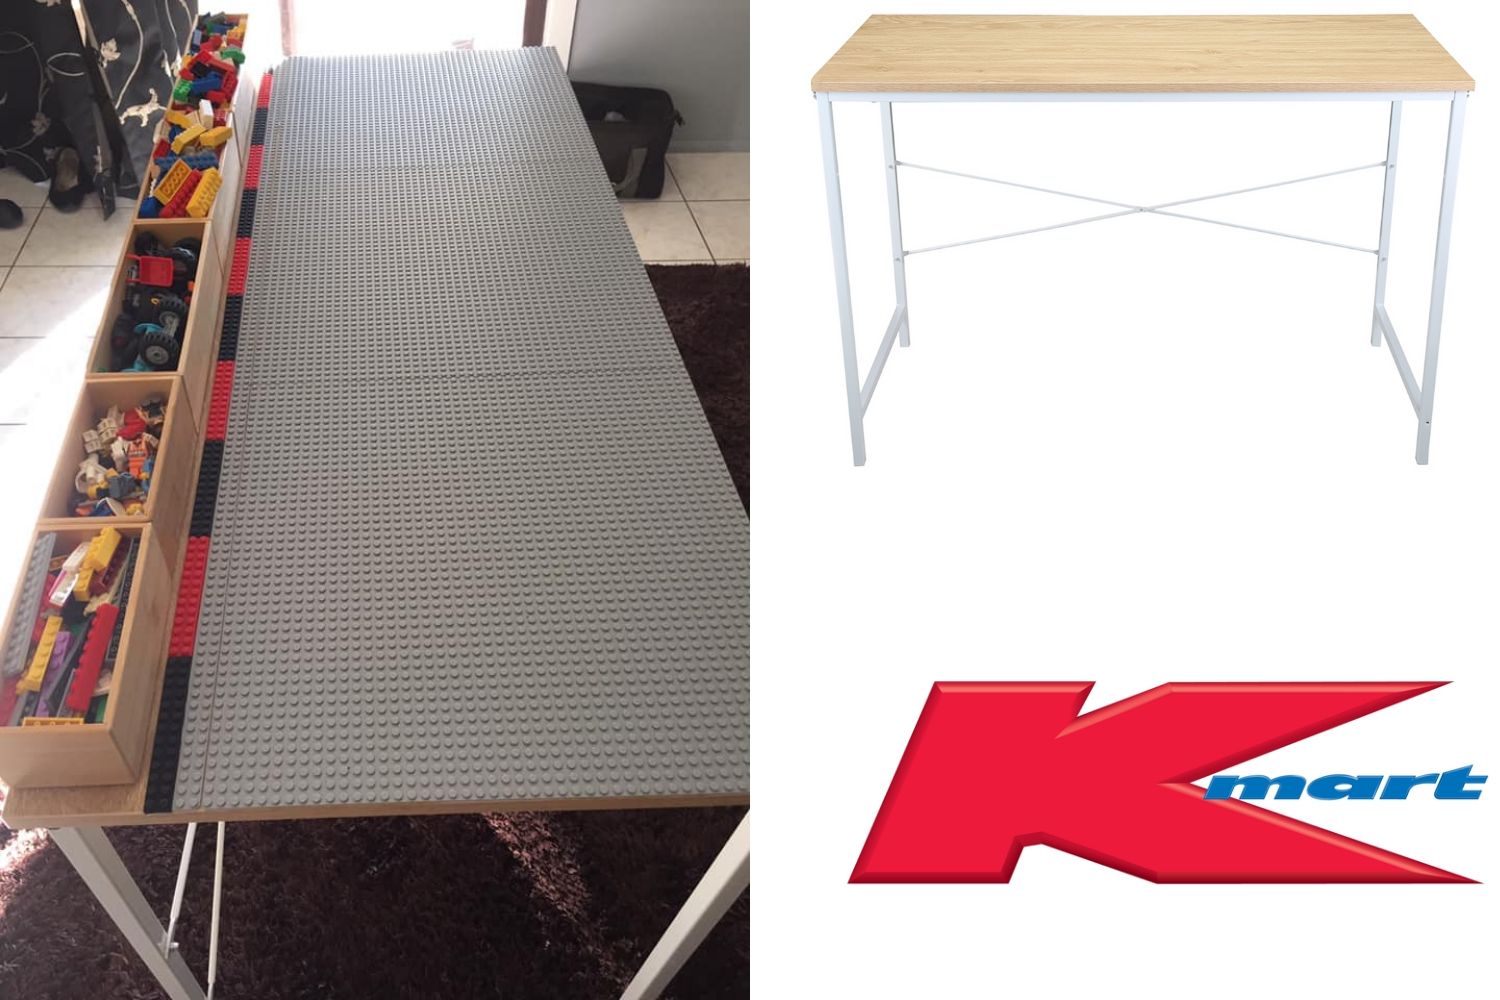 lego play table kmart